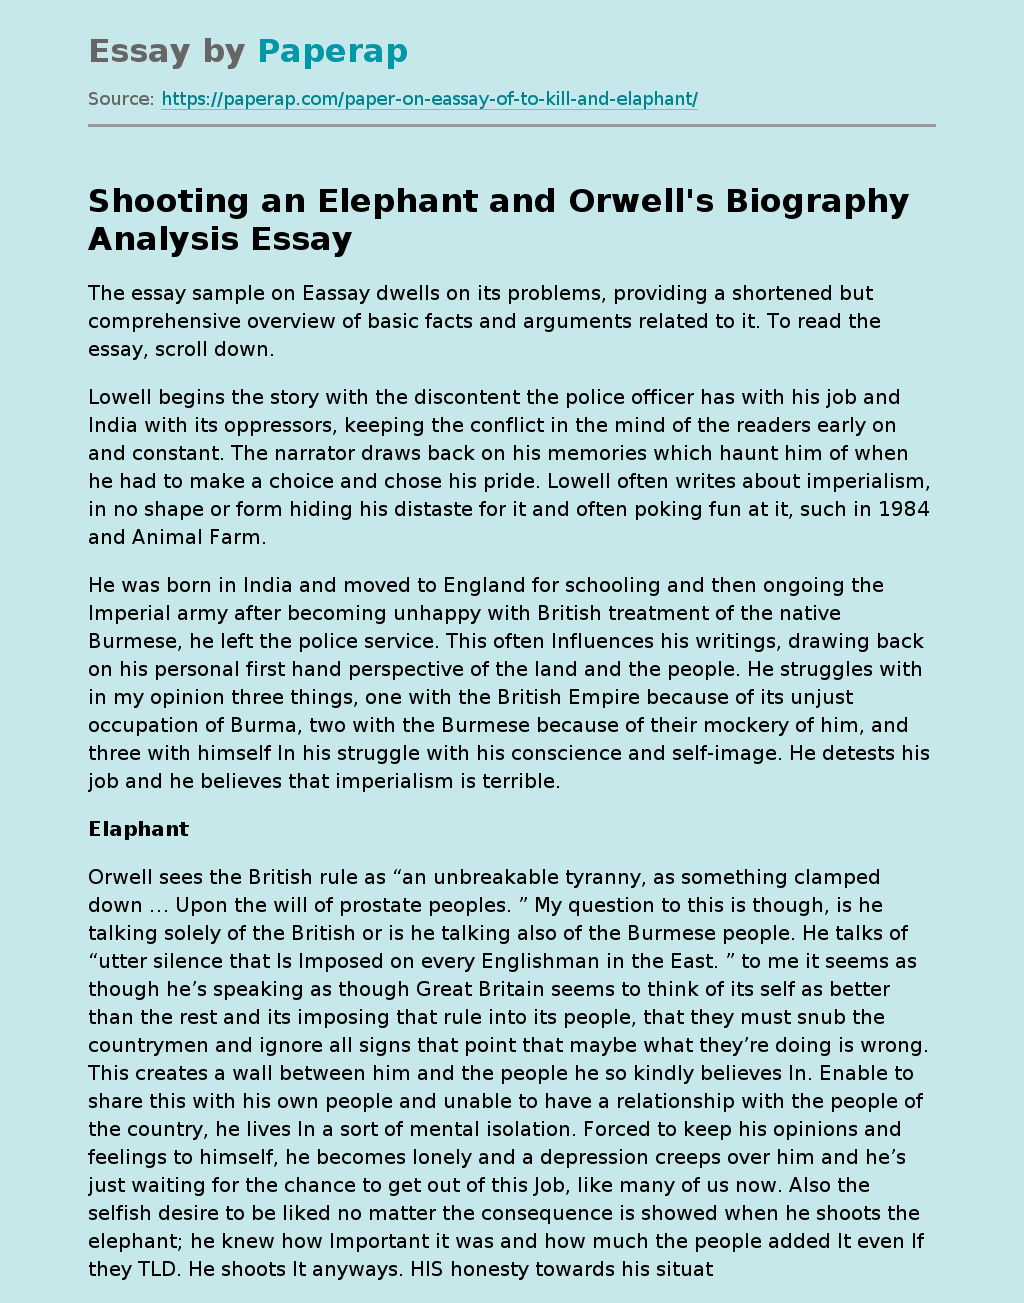 "Shooting an Elephant" and Orwell's Biography